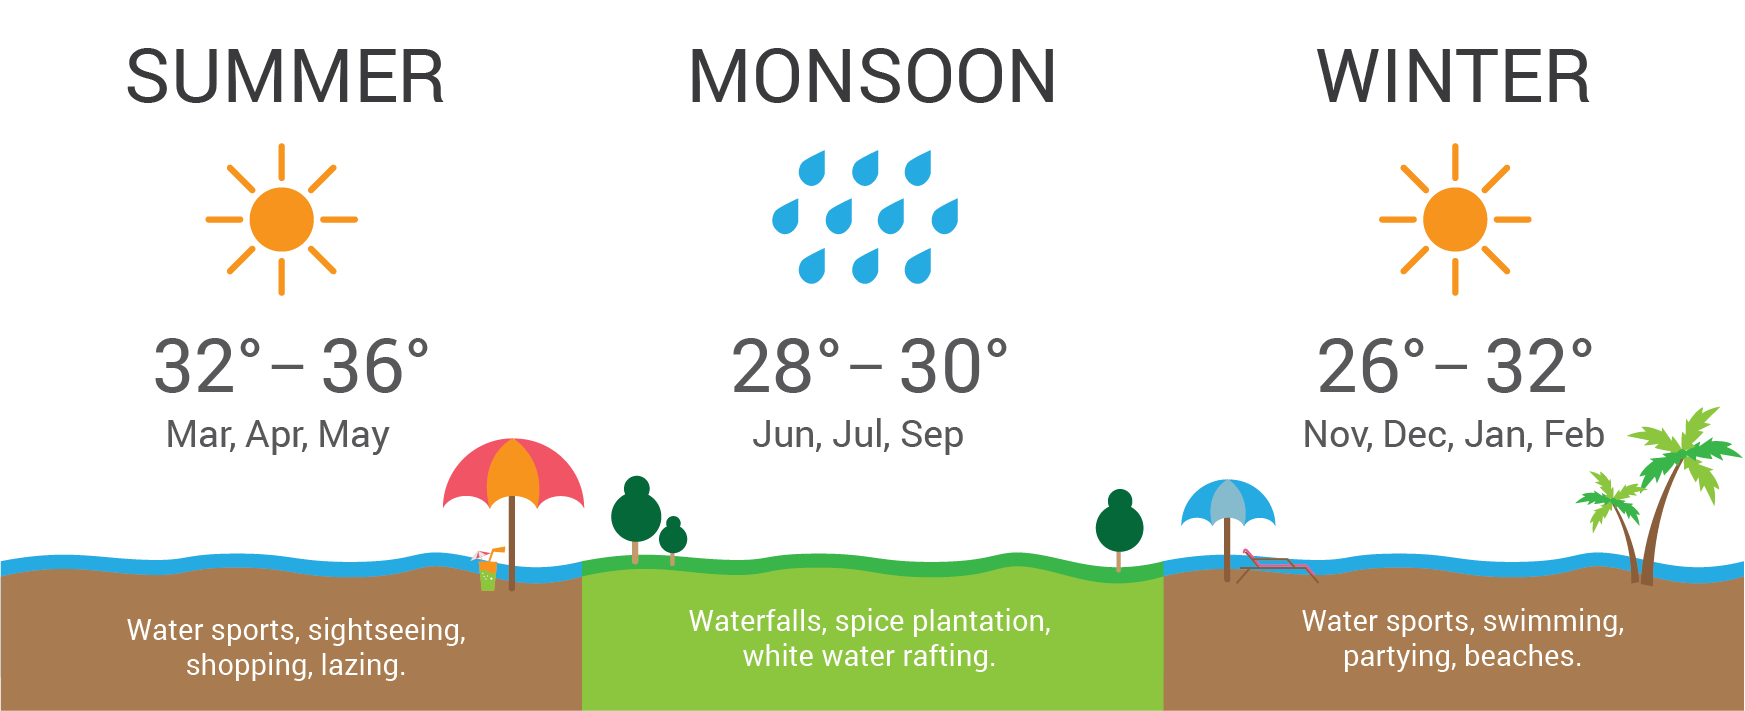 Infographic: Weather seasons and temperature in Goa